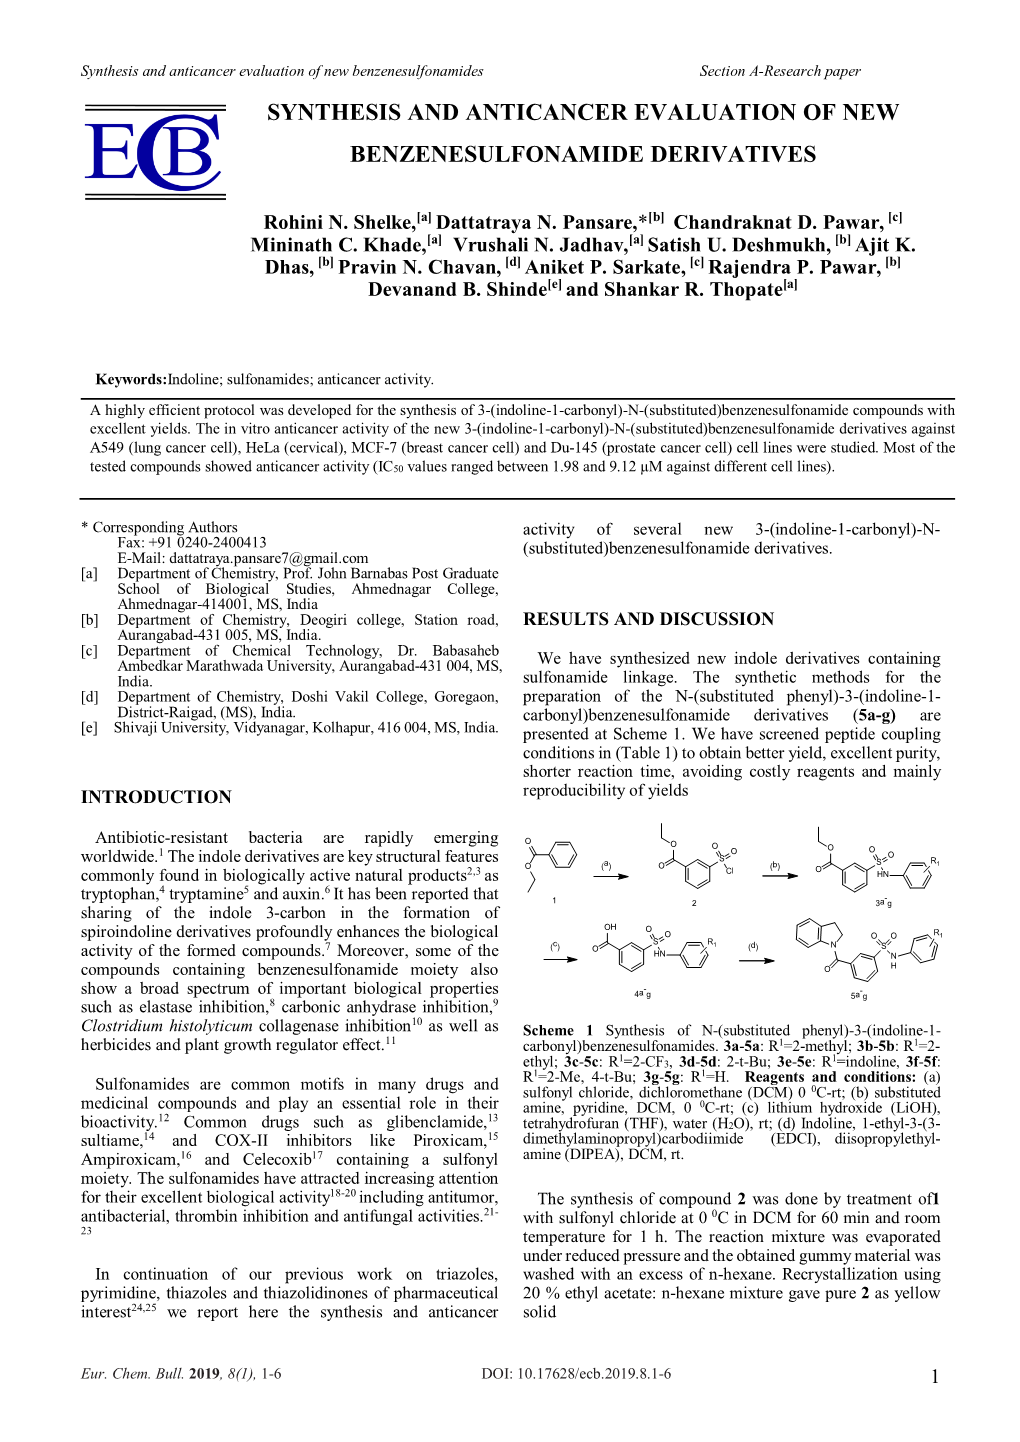 Synthesis and Anticancer Evaluation of New Benzenesulfonamides Section A-Research Paper SYNTHESIS and ANTICANCER EVALUATION of NEW BENZENESULFONAMIDE DERIVATIVES